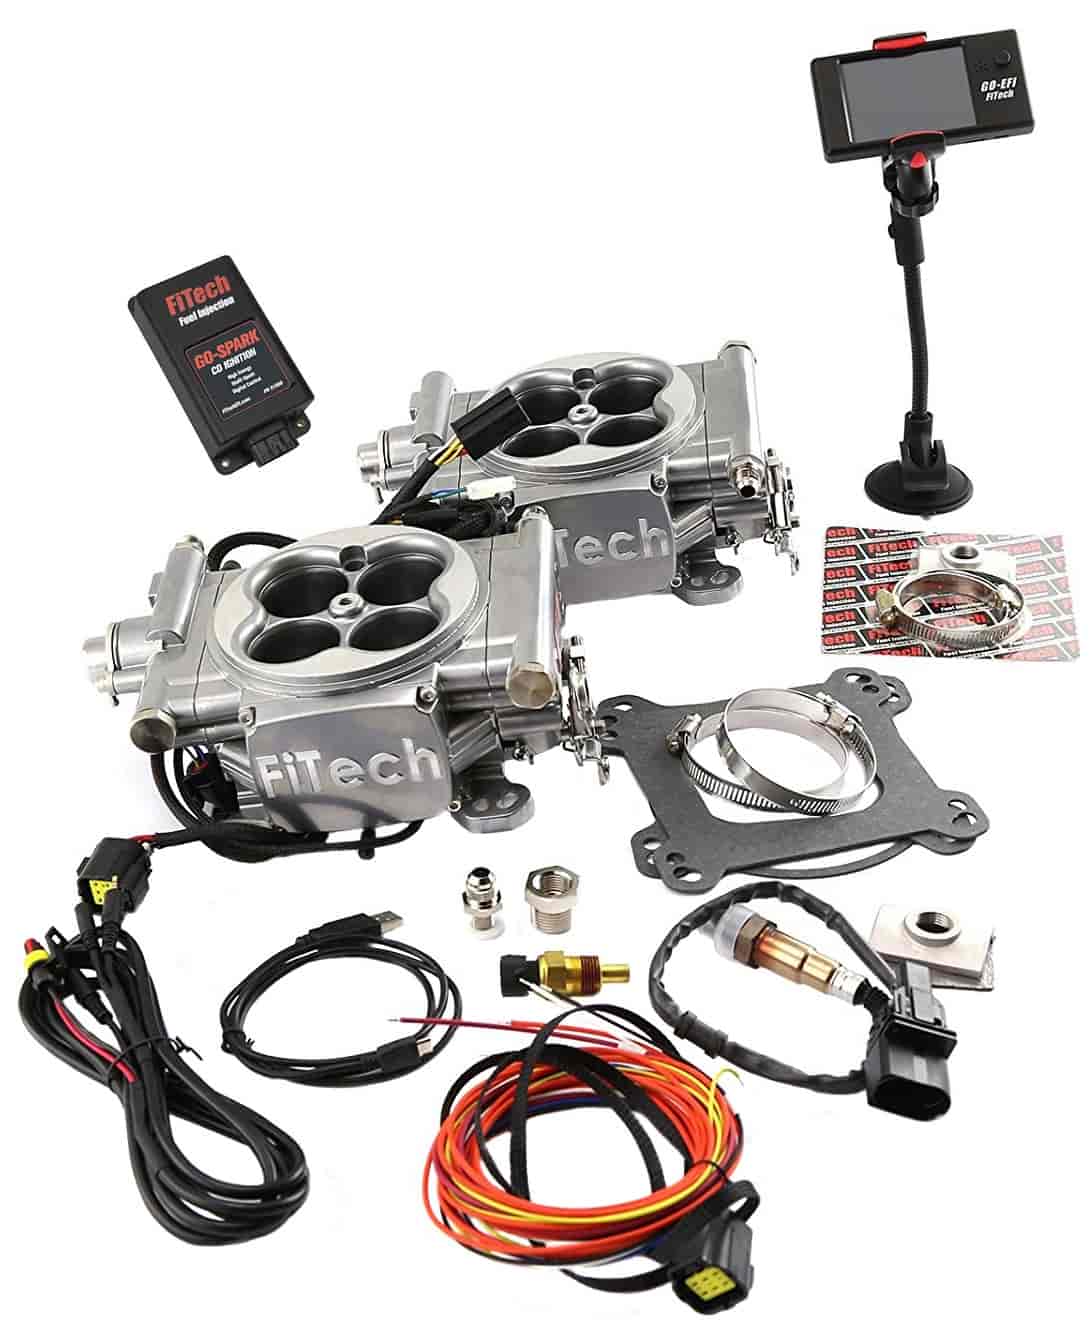 Go EFI 2x4 625 HP Dual Quad Throttle Body Fuel Injection Master Kit [With Inline Fuel Pump & CDI Box] Bright Aluminum